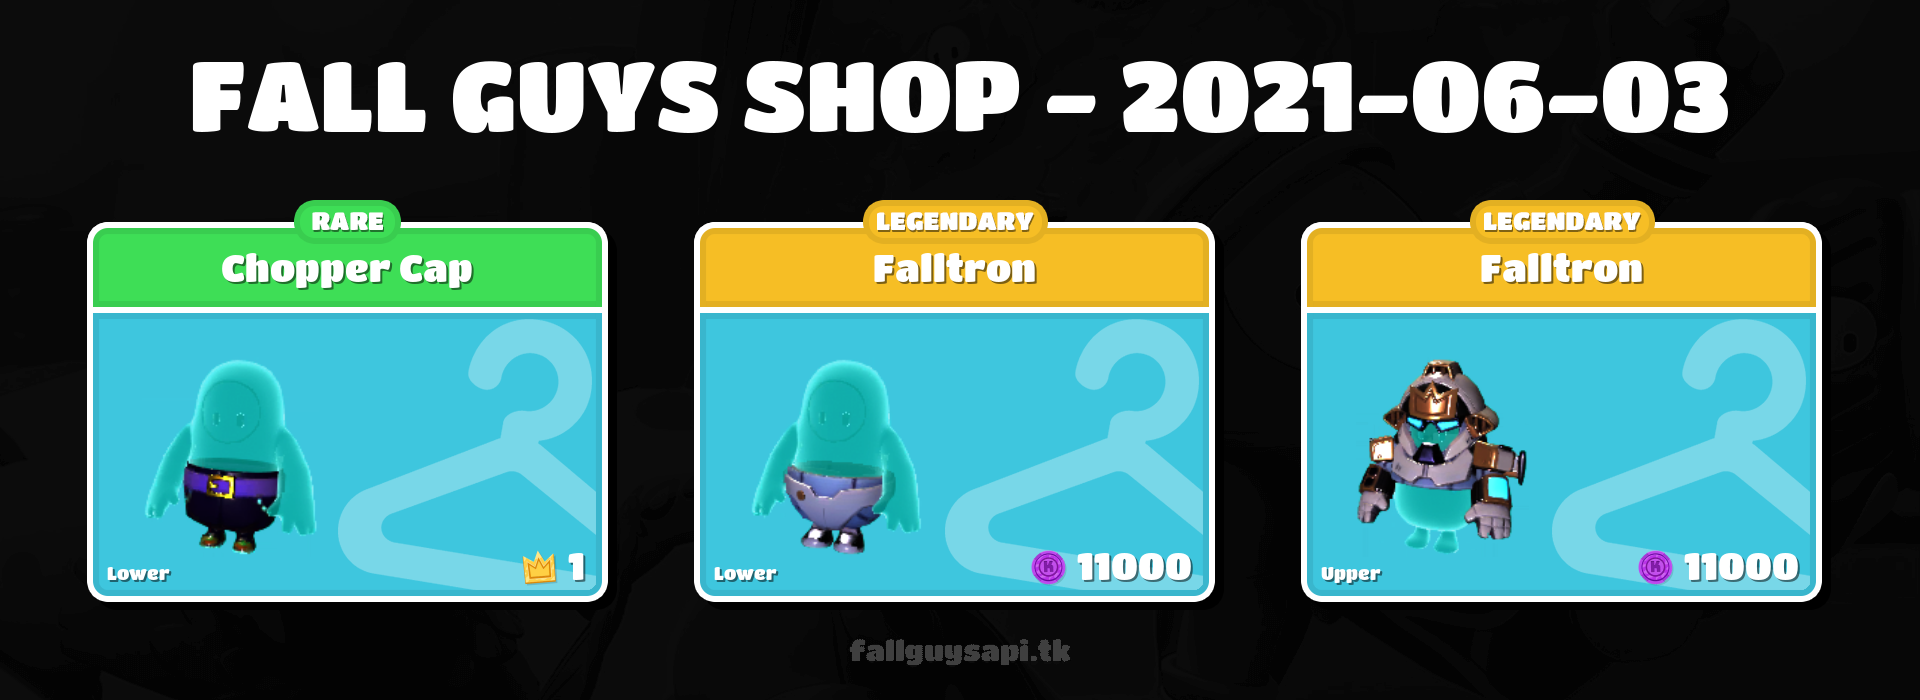 Fall Guys: Ultimate Knockout - [S4] Featured shop - What's on sale? - Jun 03 - Jun 06